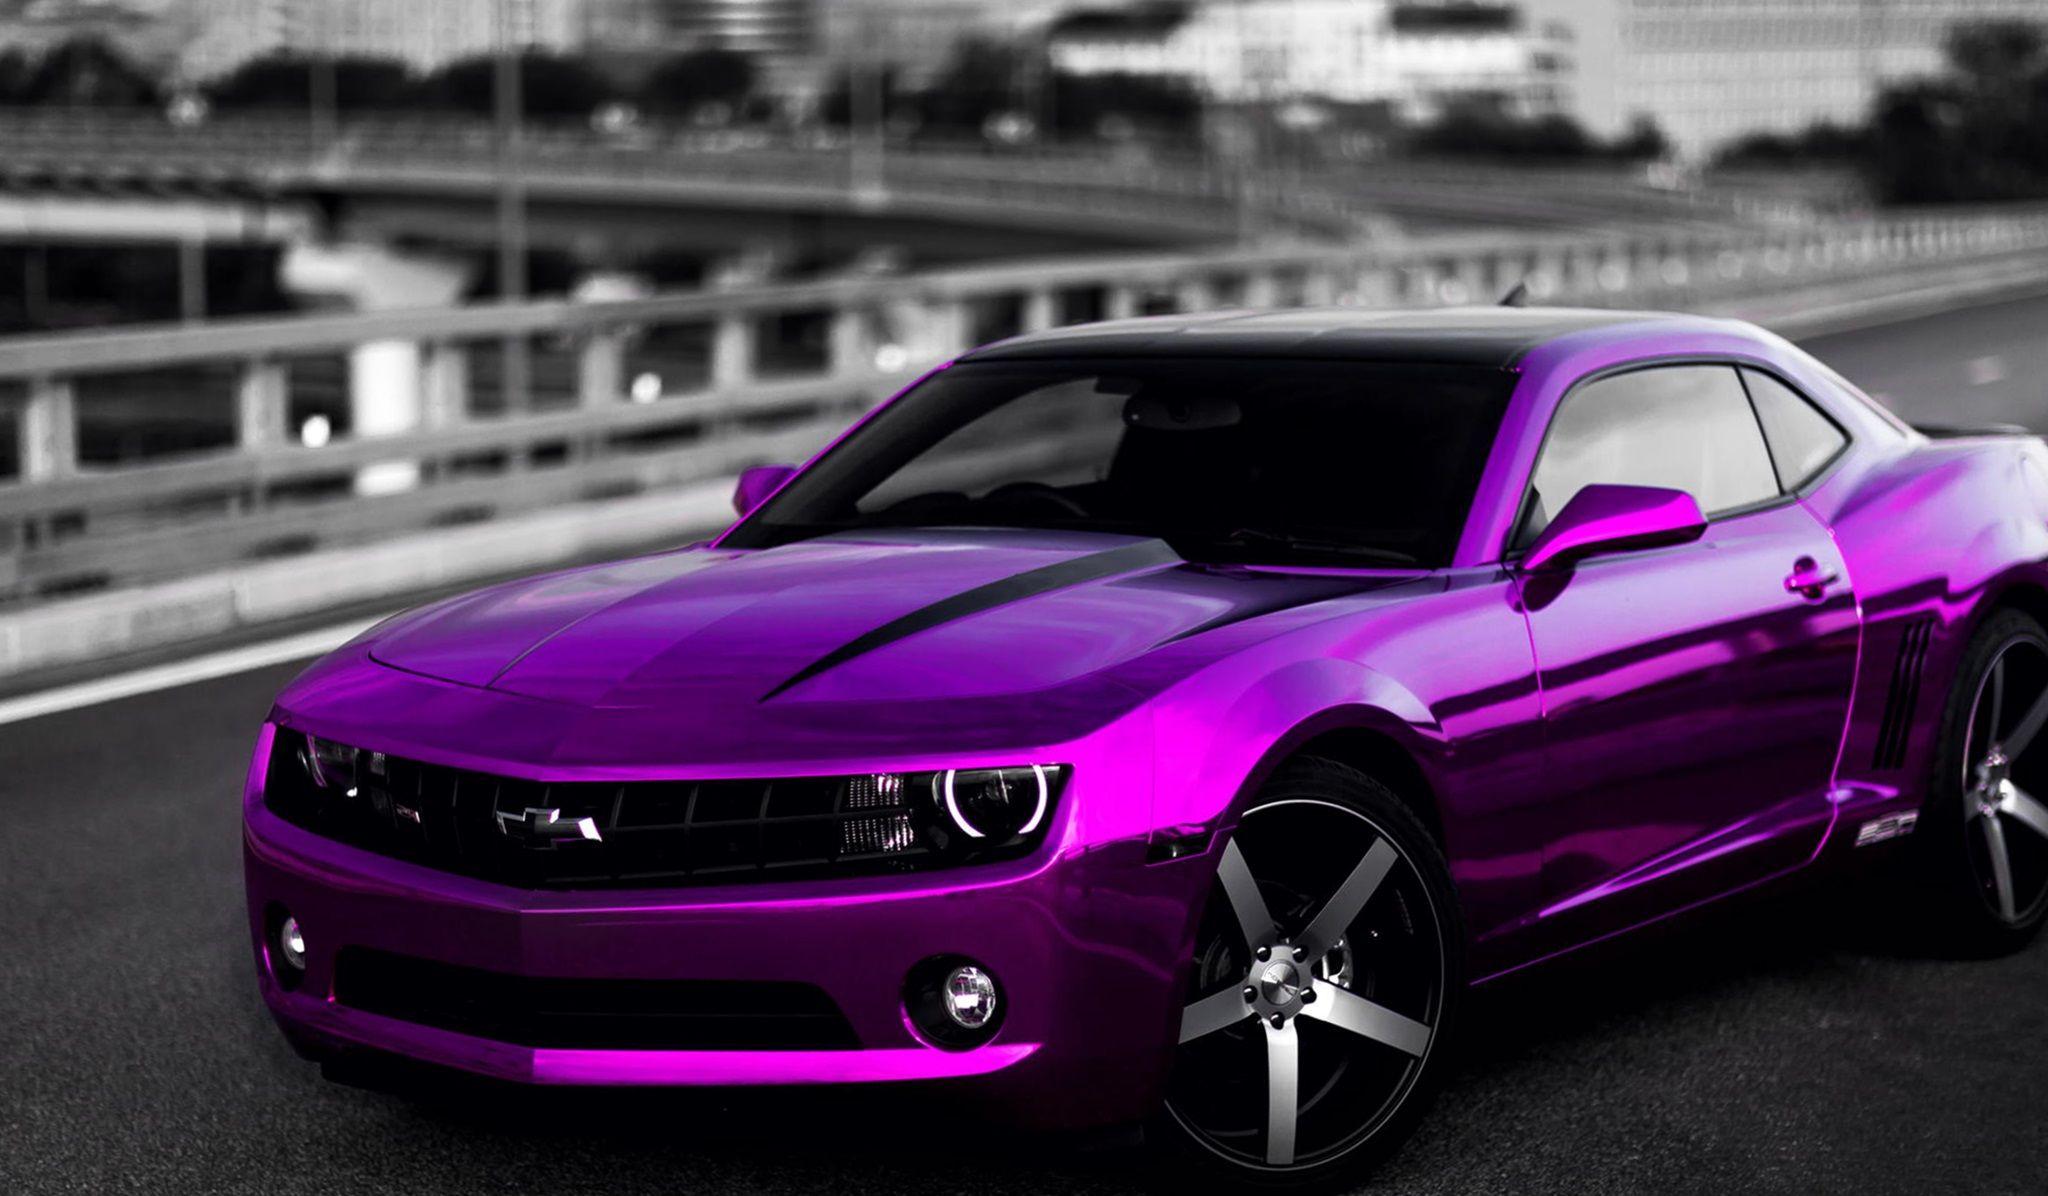 Hd Car Wallpaper For Android Tablets.Beautiful Purple Car